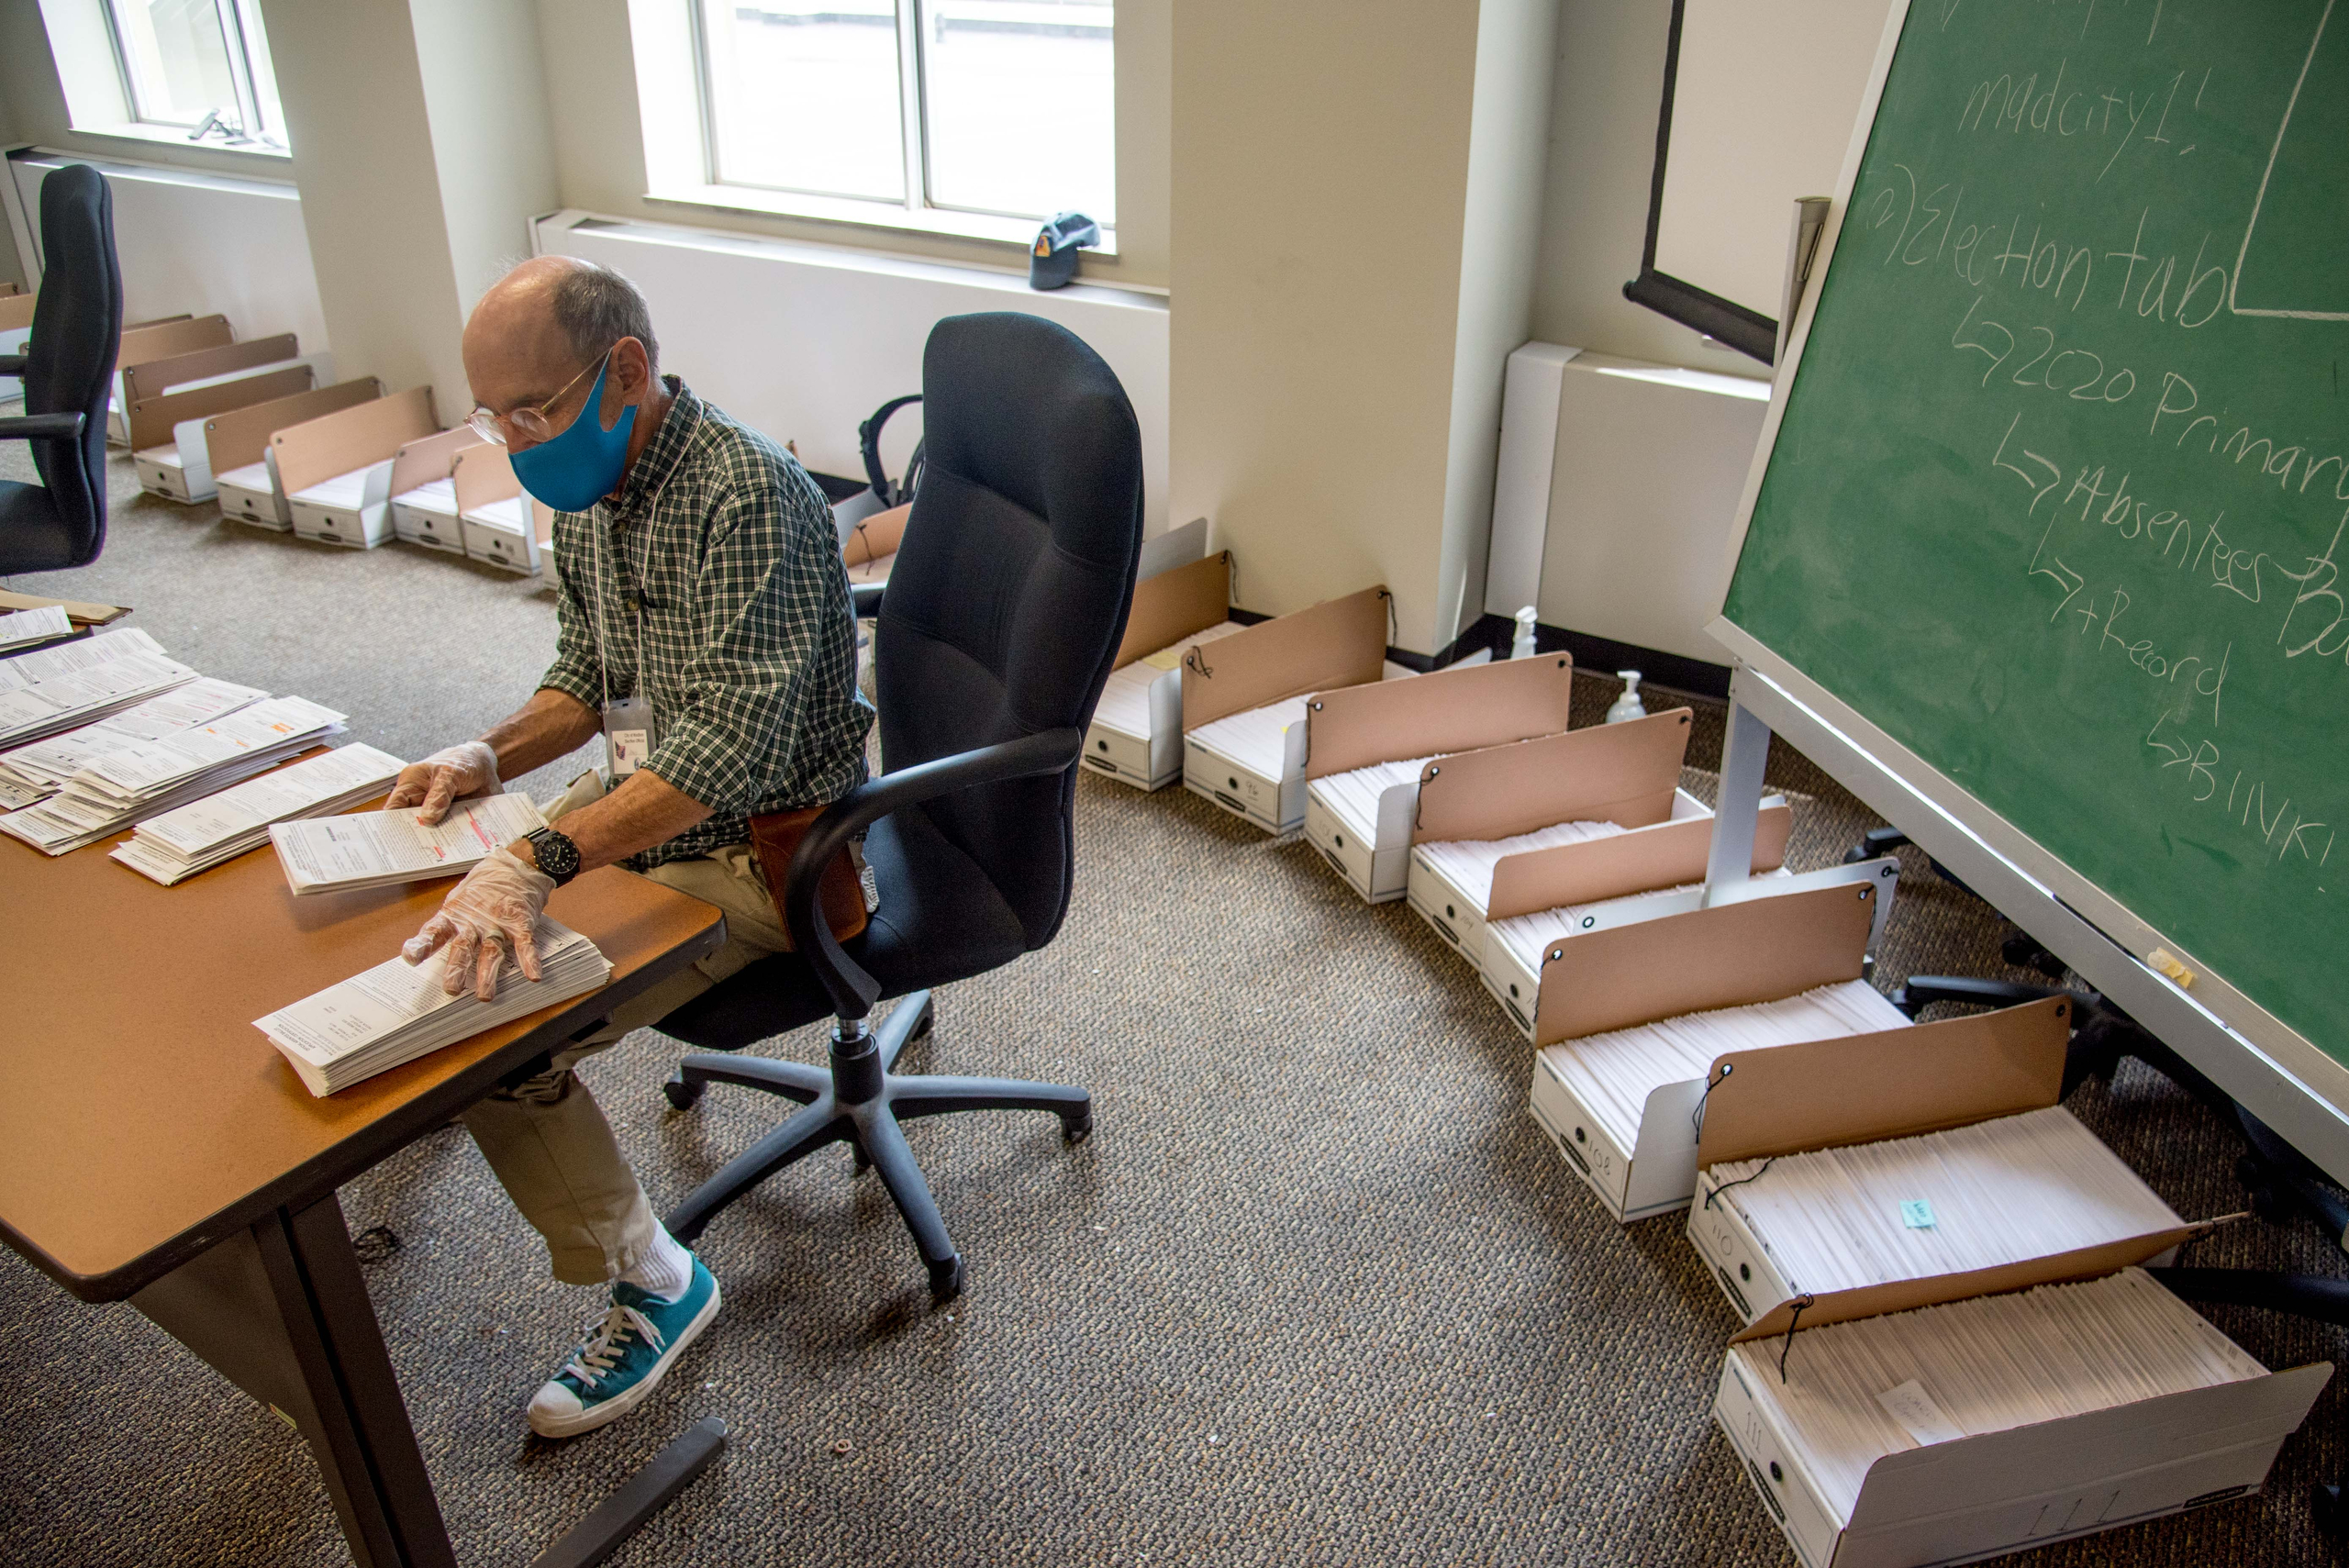 Election official Lenny Black alphabetizes returned absentee ballots in the City-County Building in Madison